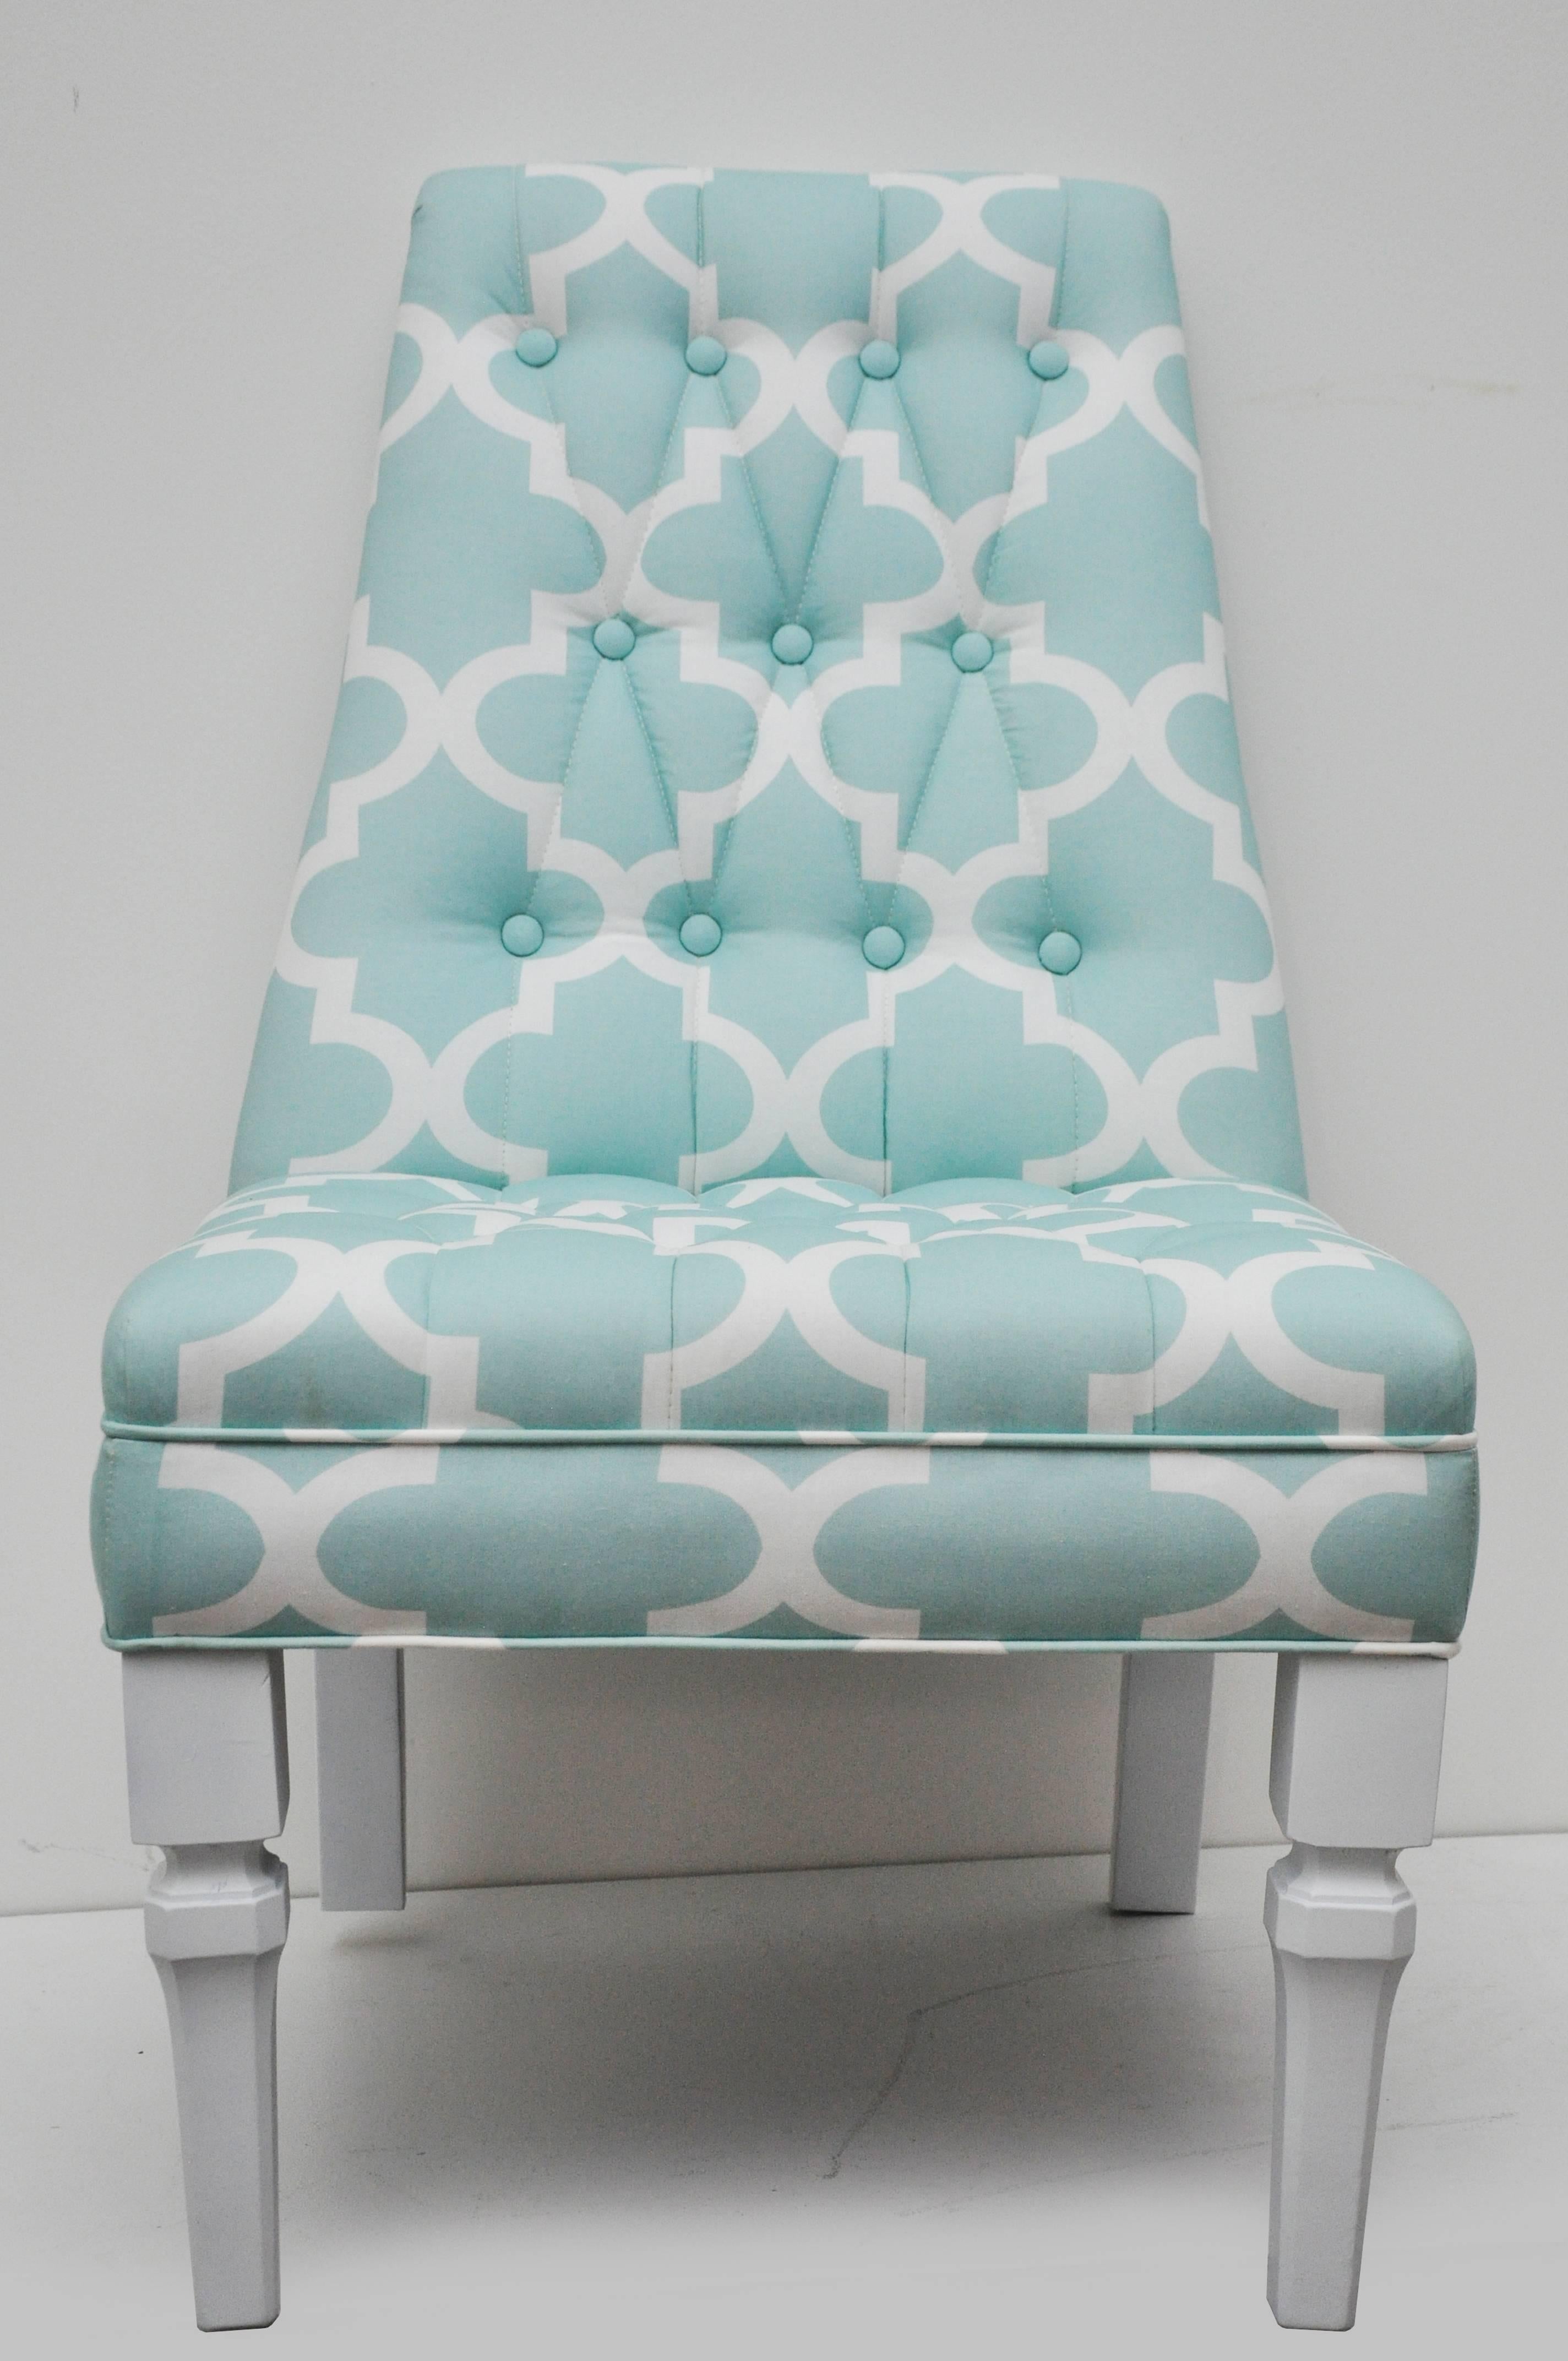 Mid-20th Century Vintage Moroccan Style Pr of Turquoise/White Upholstered Chairs For Sale